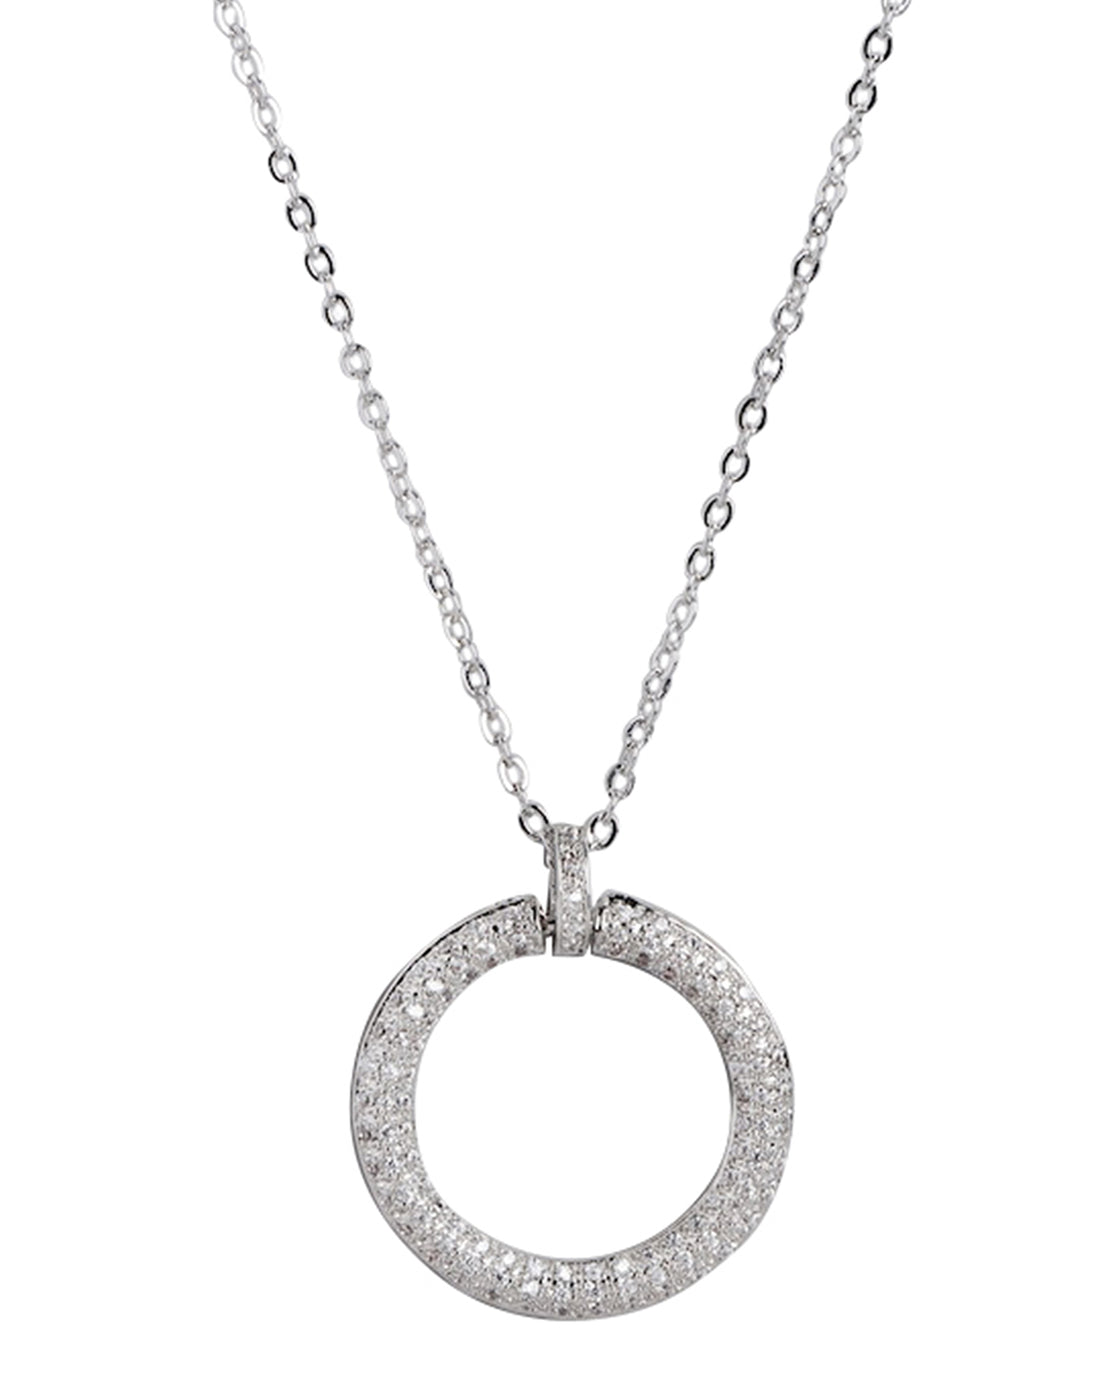 Cz With Rhodium Plated Circular Pendant With Chain For Women